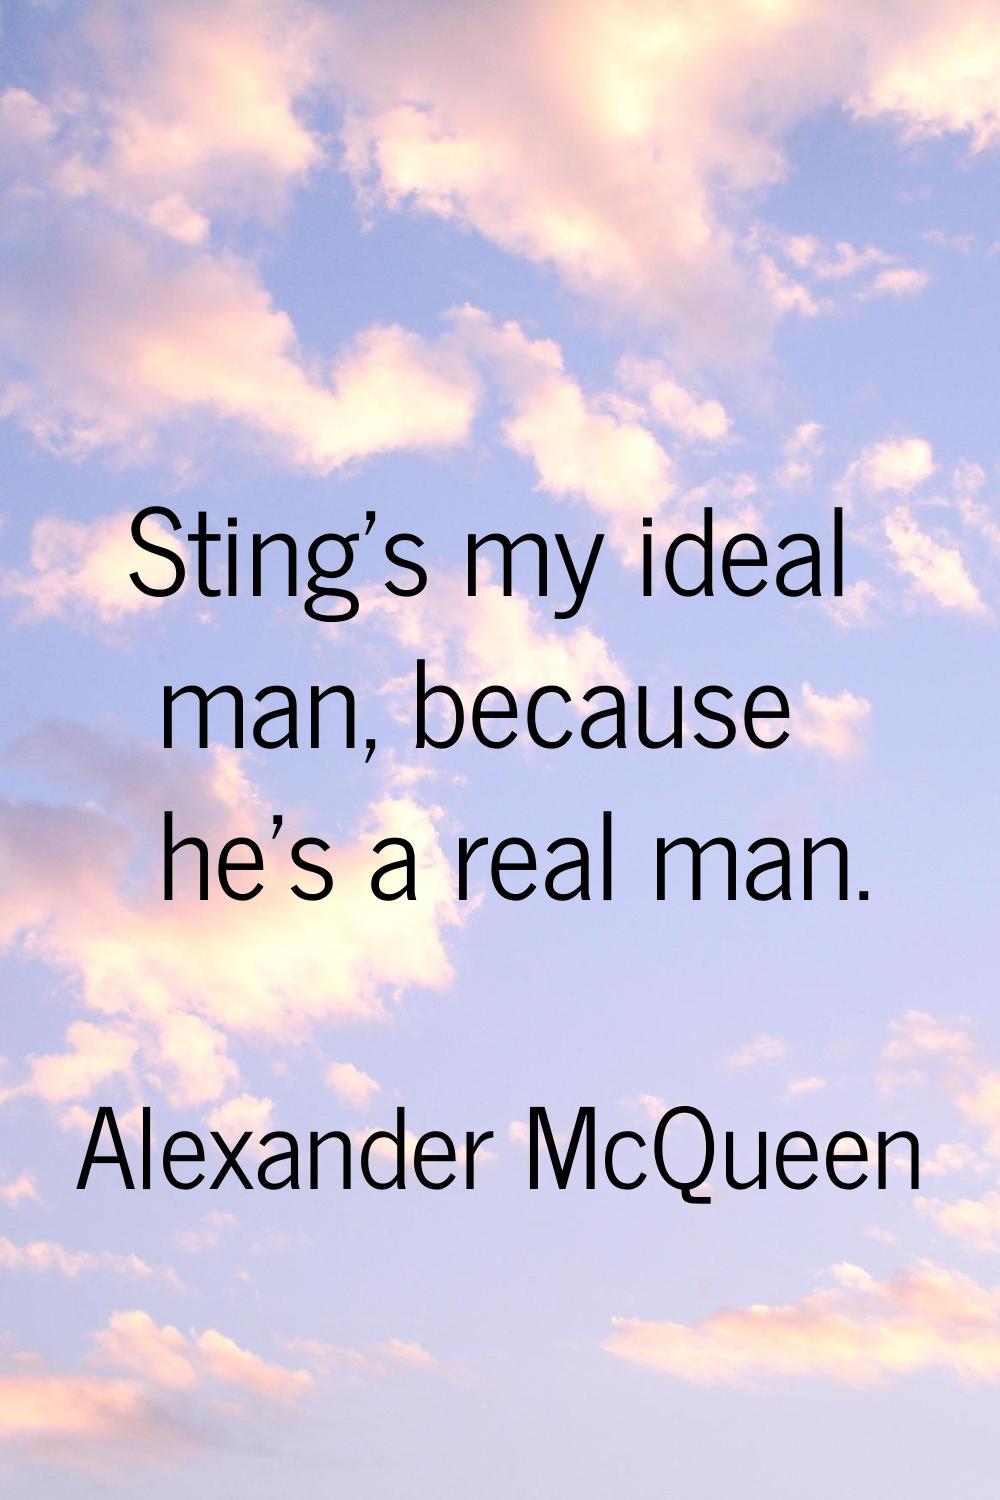 Sting's my ideal man, because he's a real man.